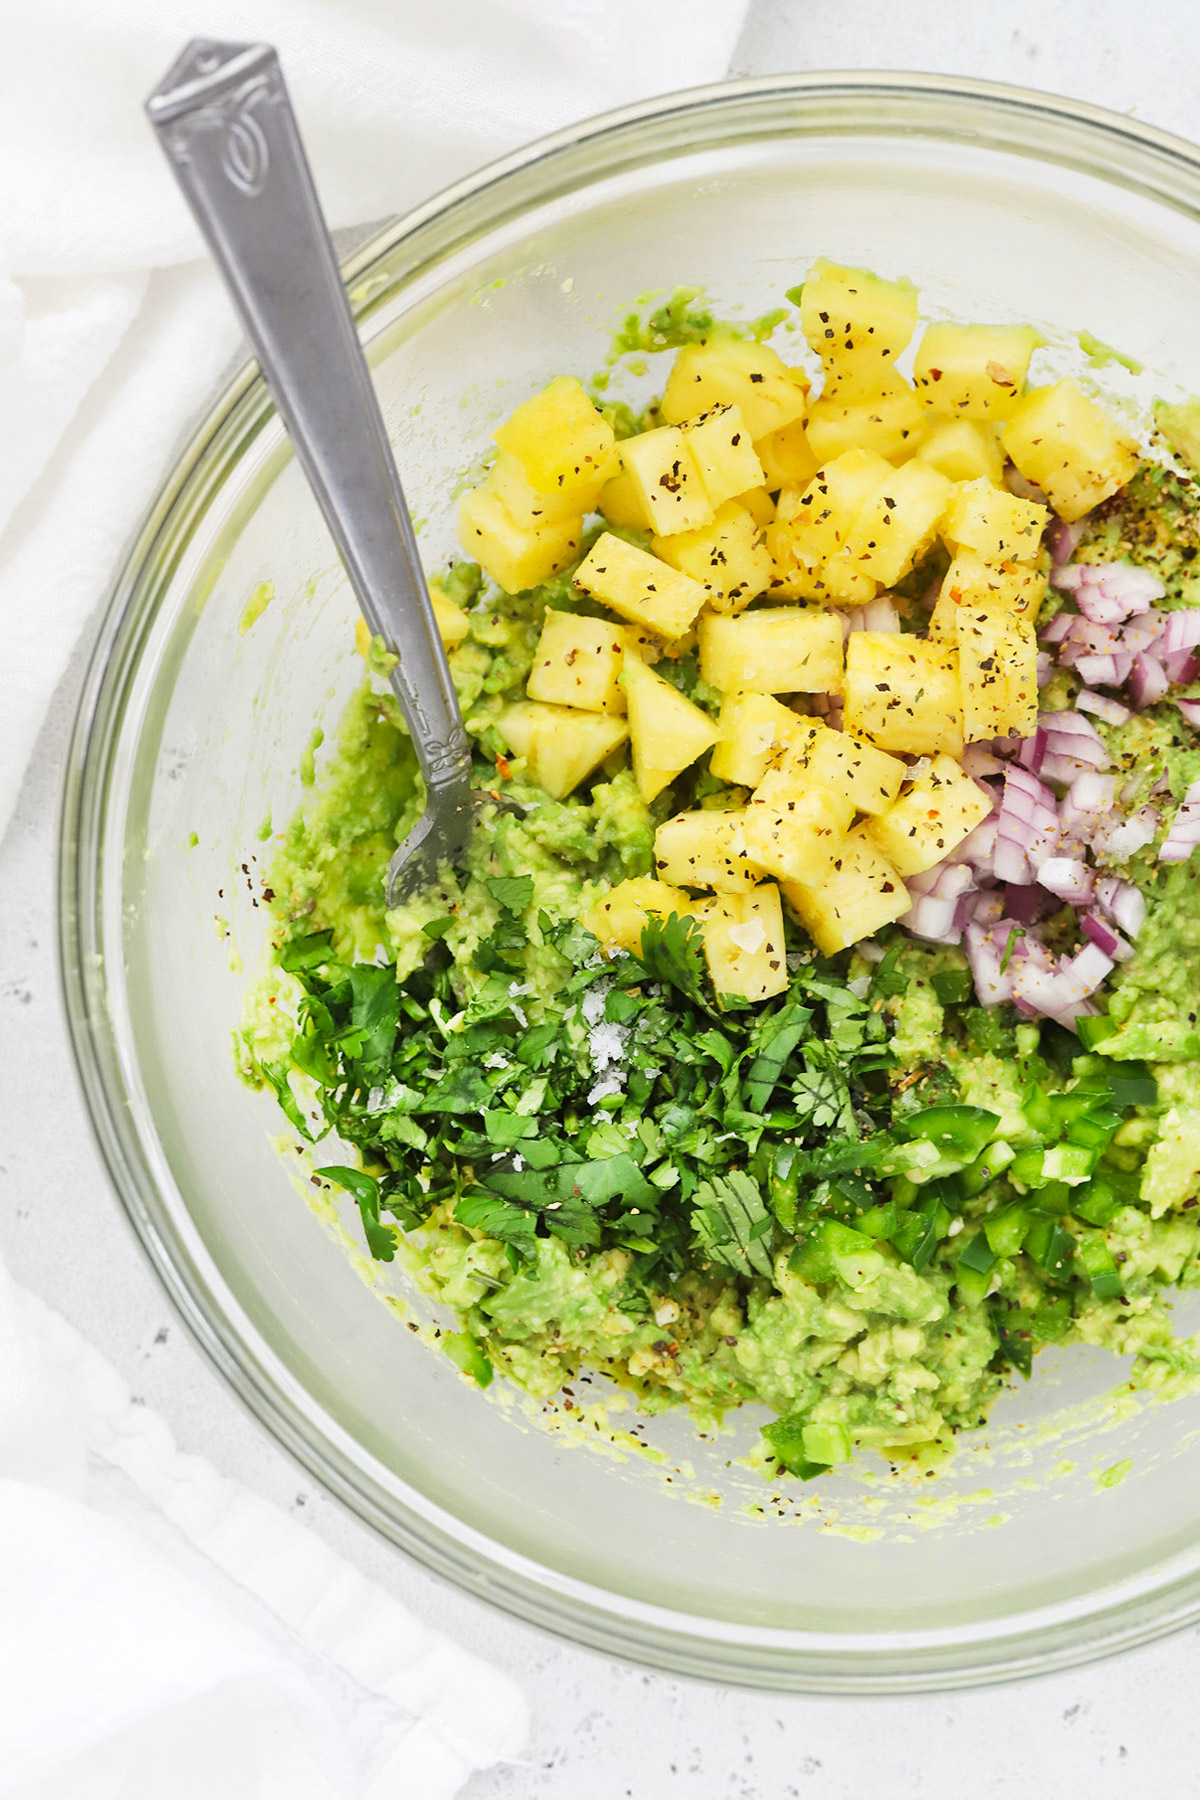 Overhead view of a glass bowl with ingredients for pineapple guacamole inside